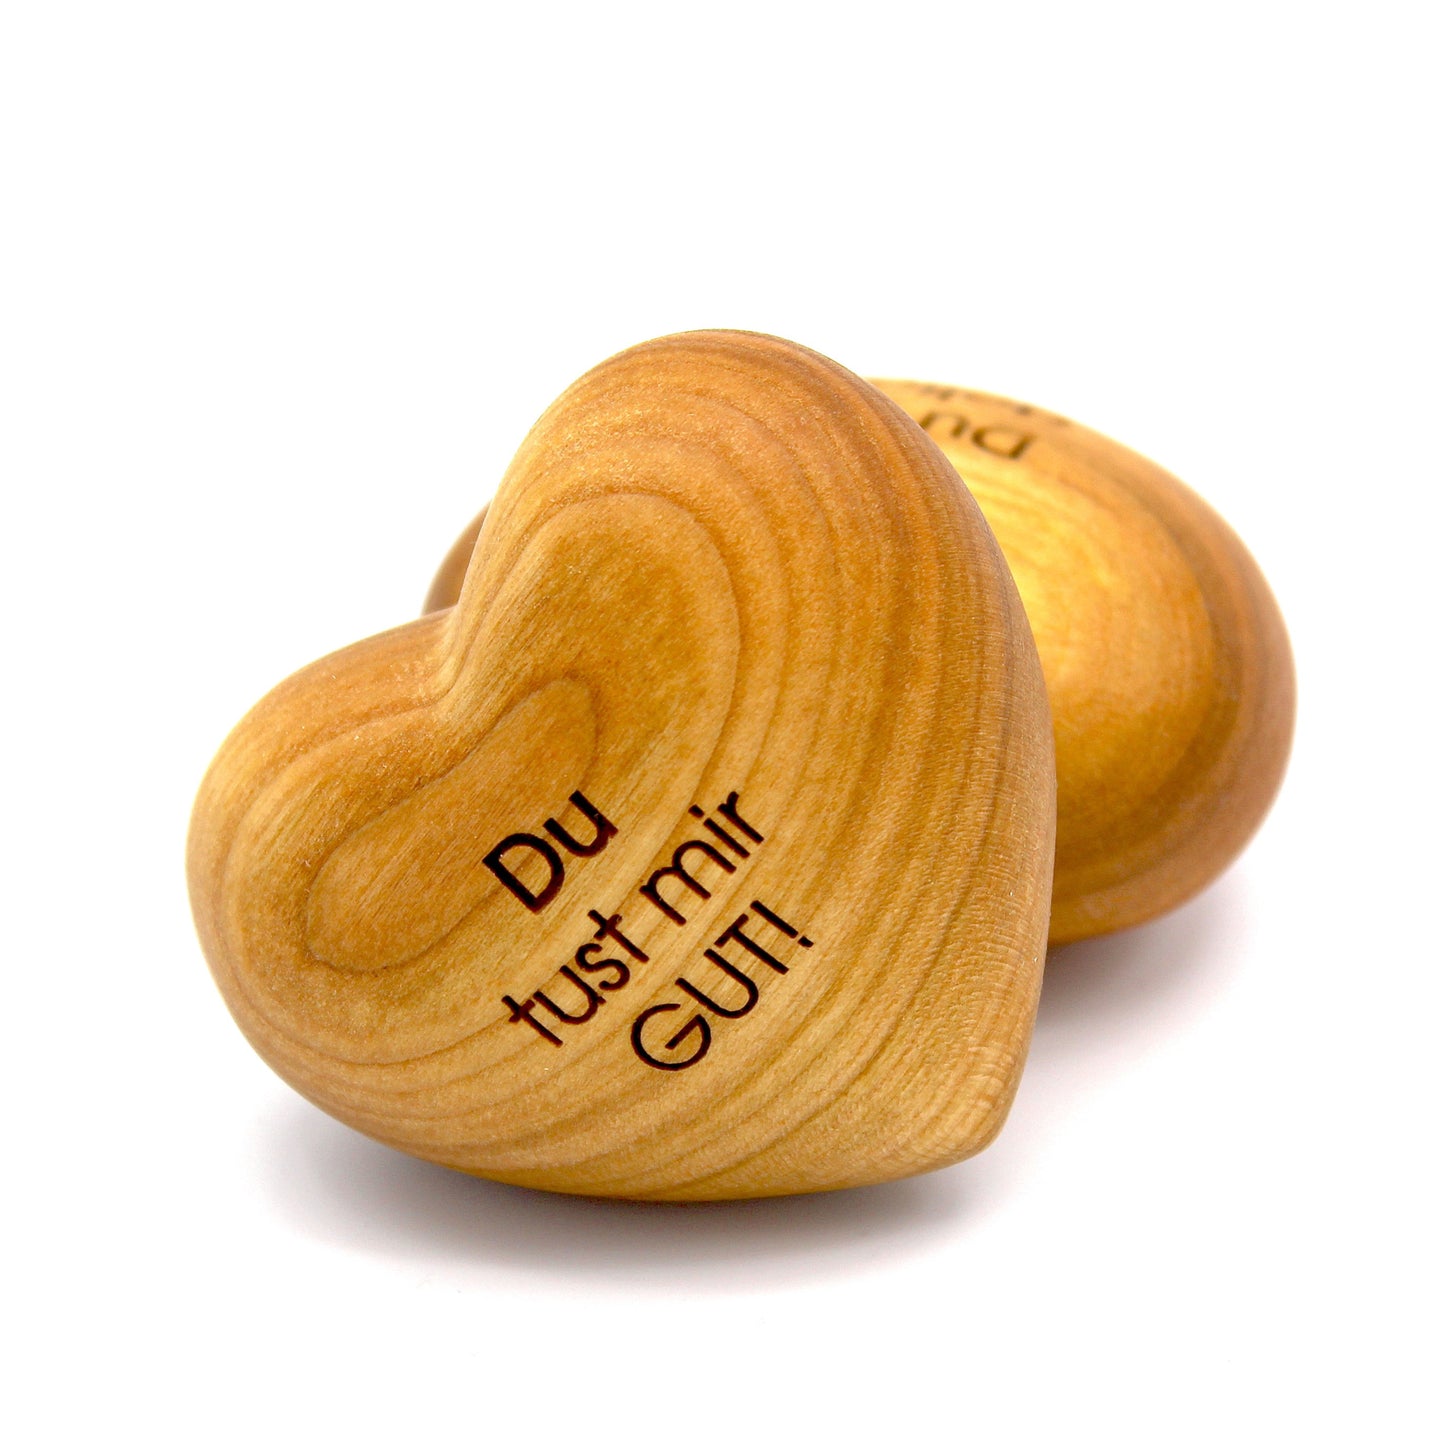 Thankgoods wooden heart You're good for me!